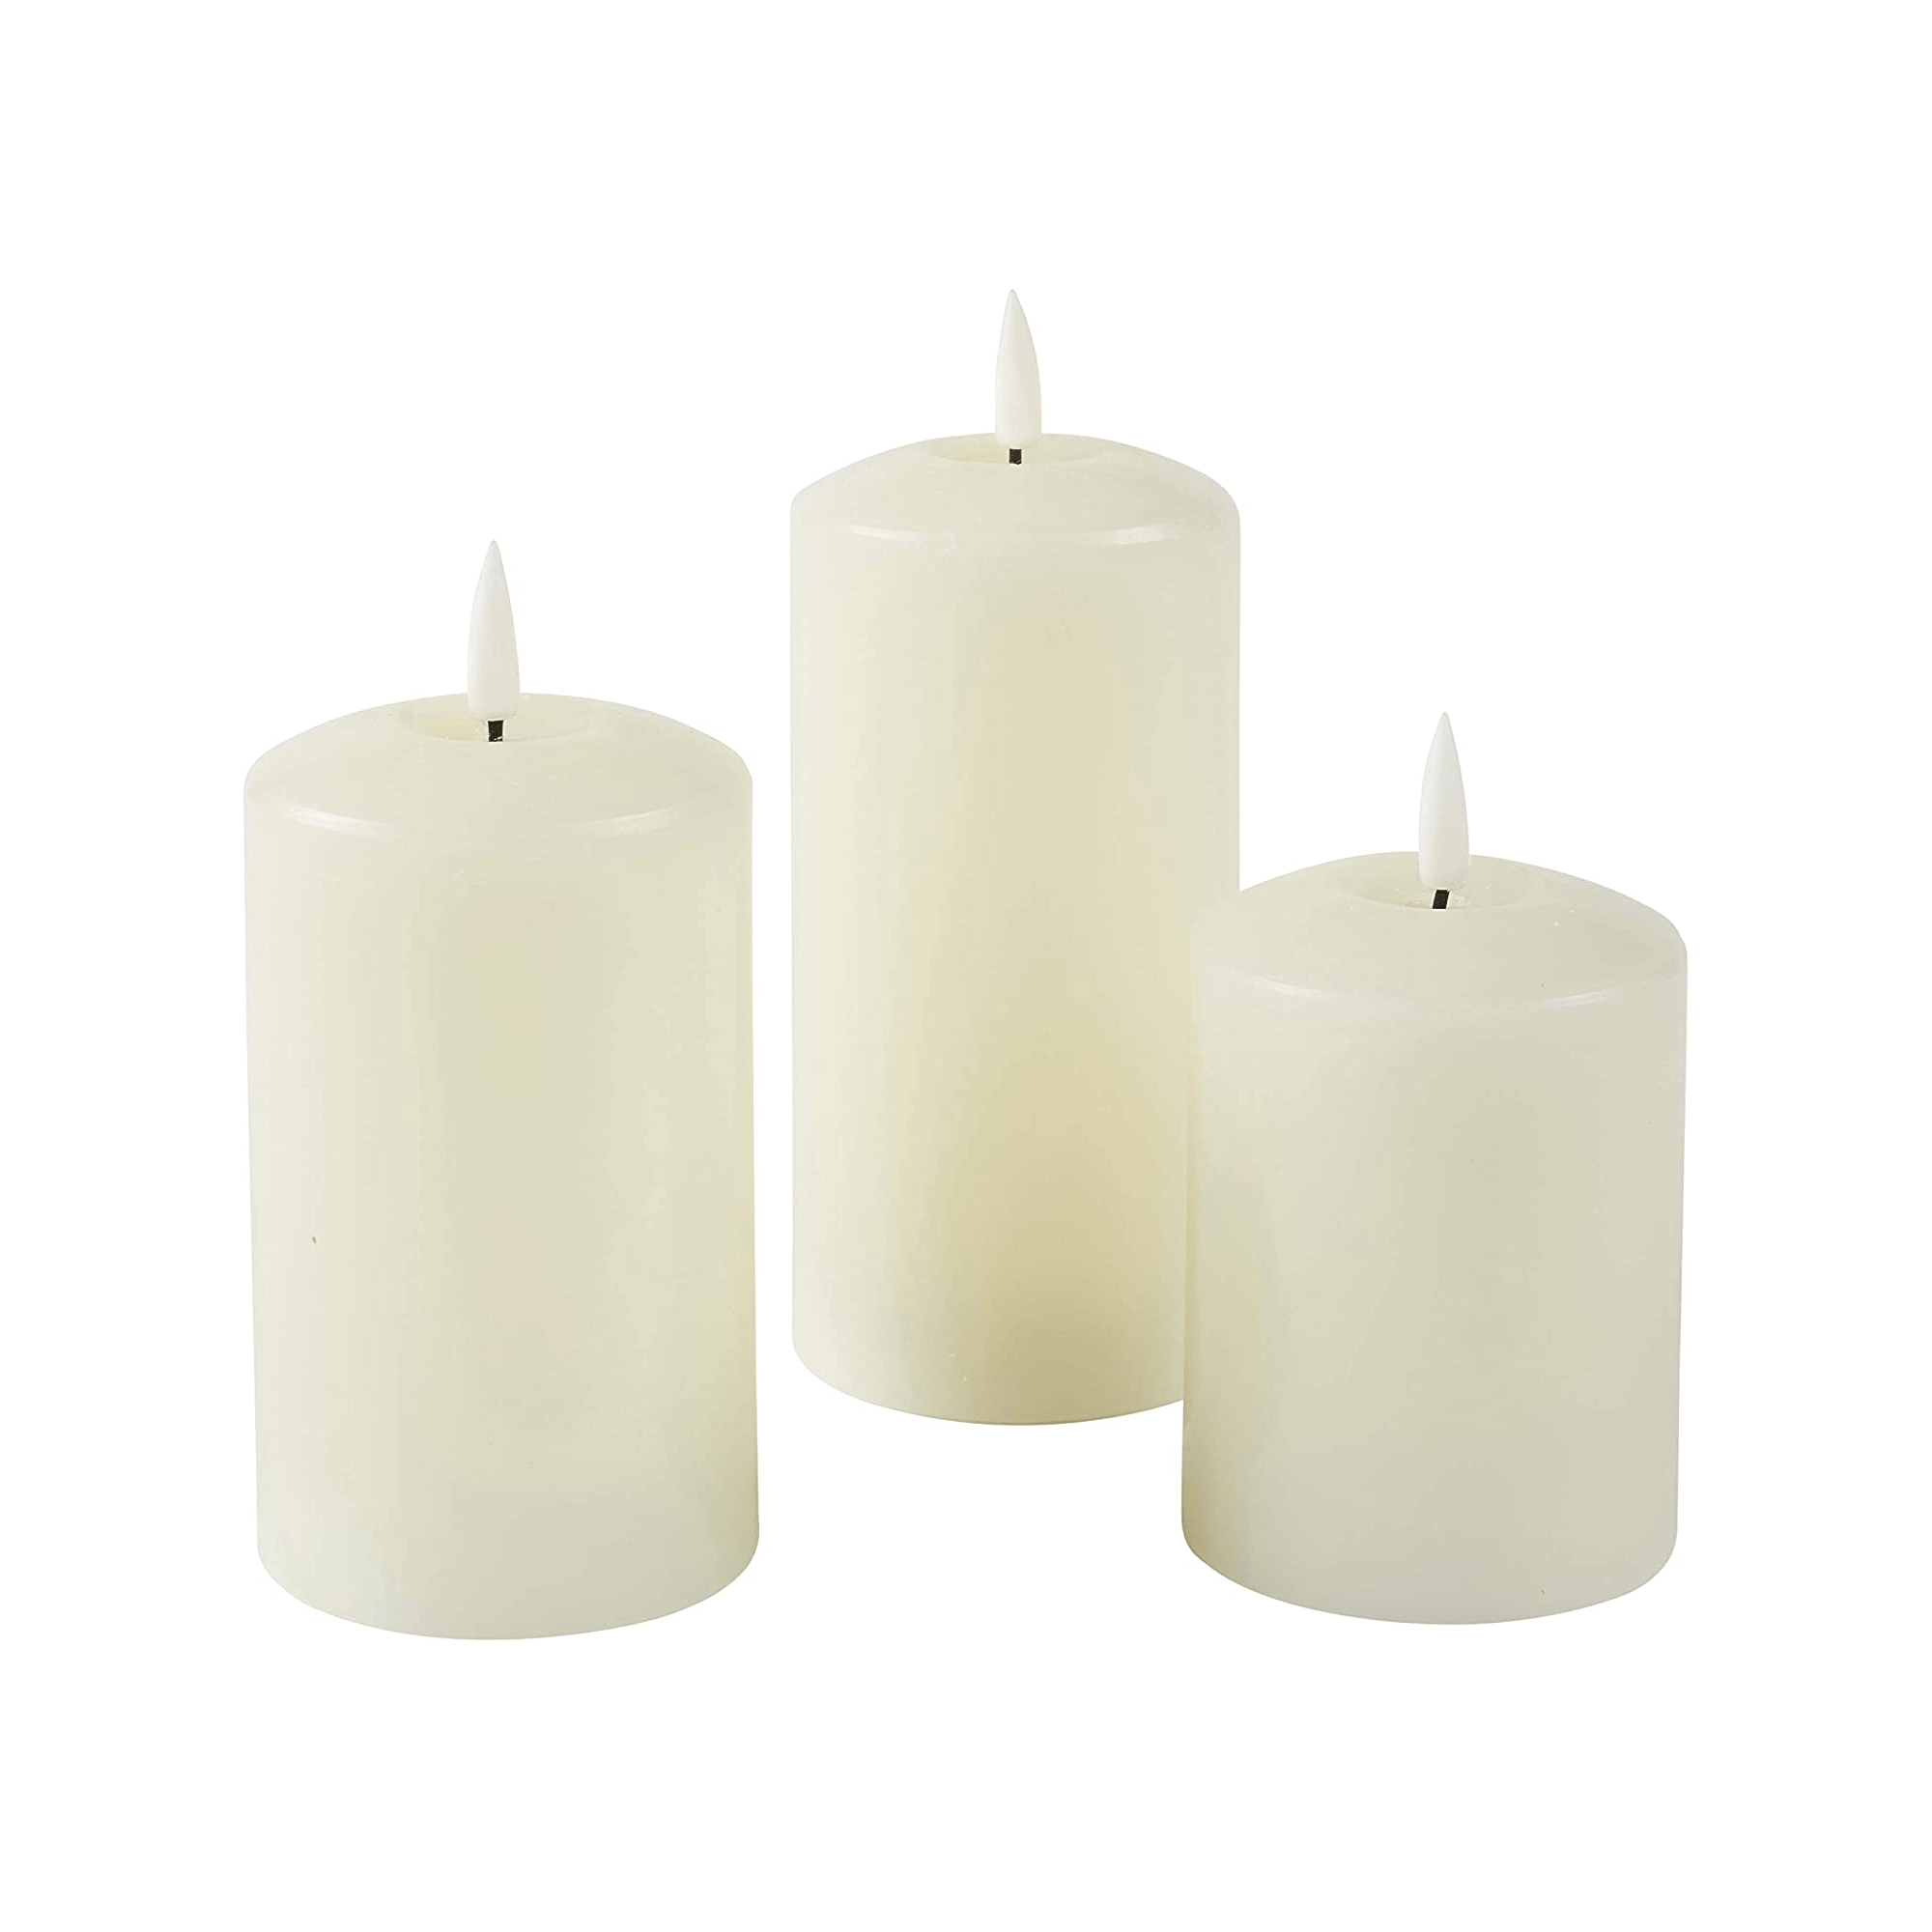 Lexi Lighting Christmas Table Decoration&Candle Set of 2 LED Ivory Wax Pillar Candles - 3 Size options